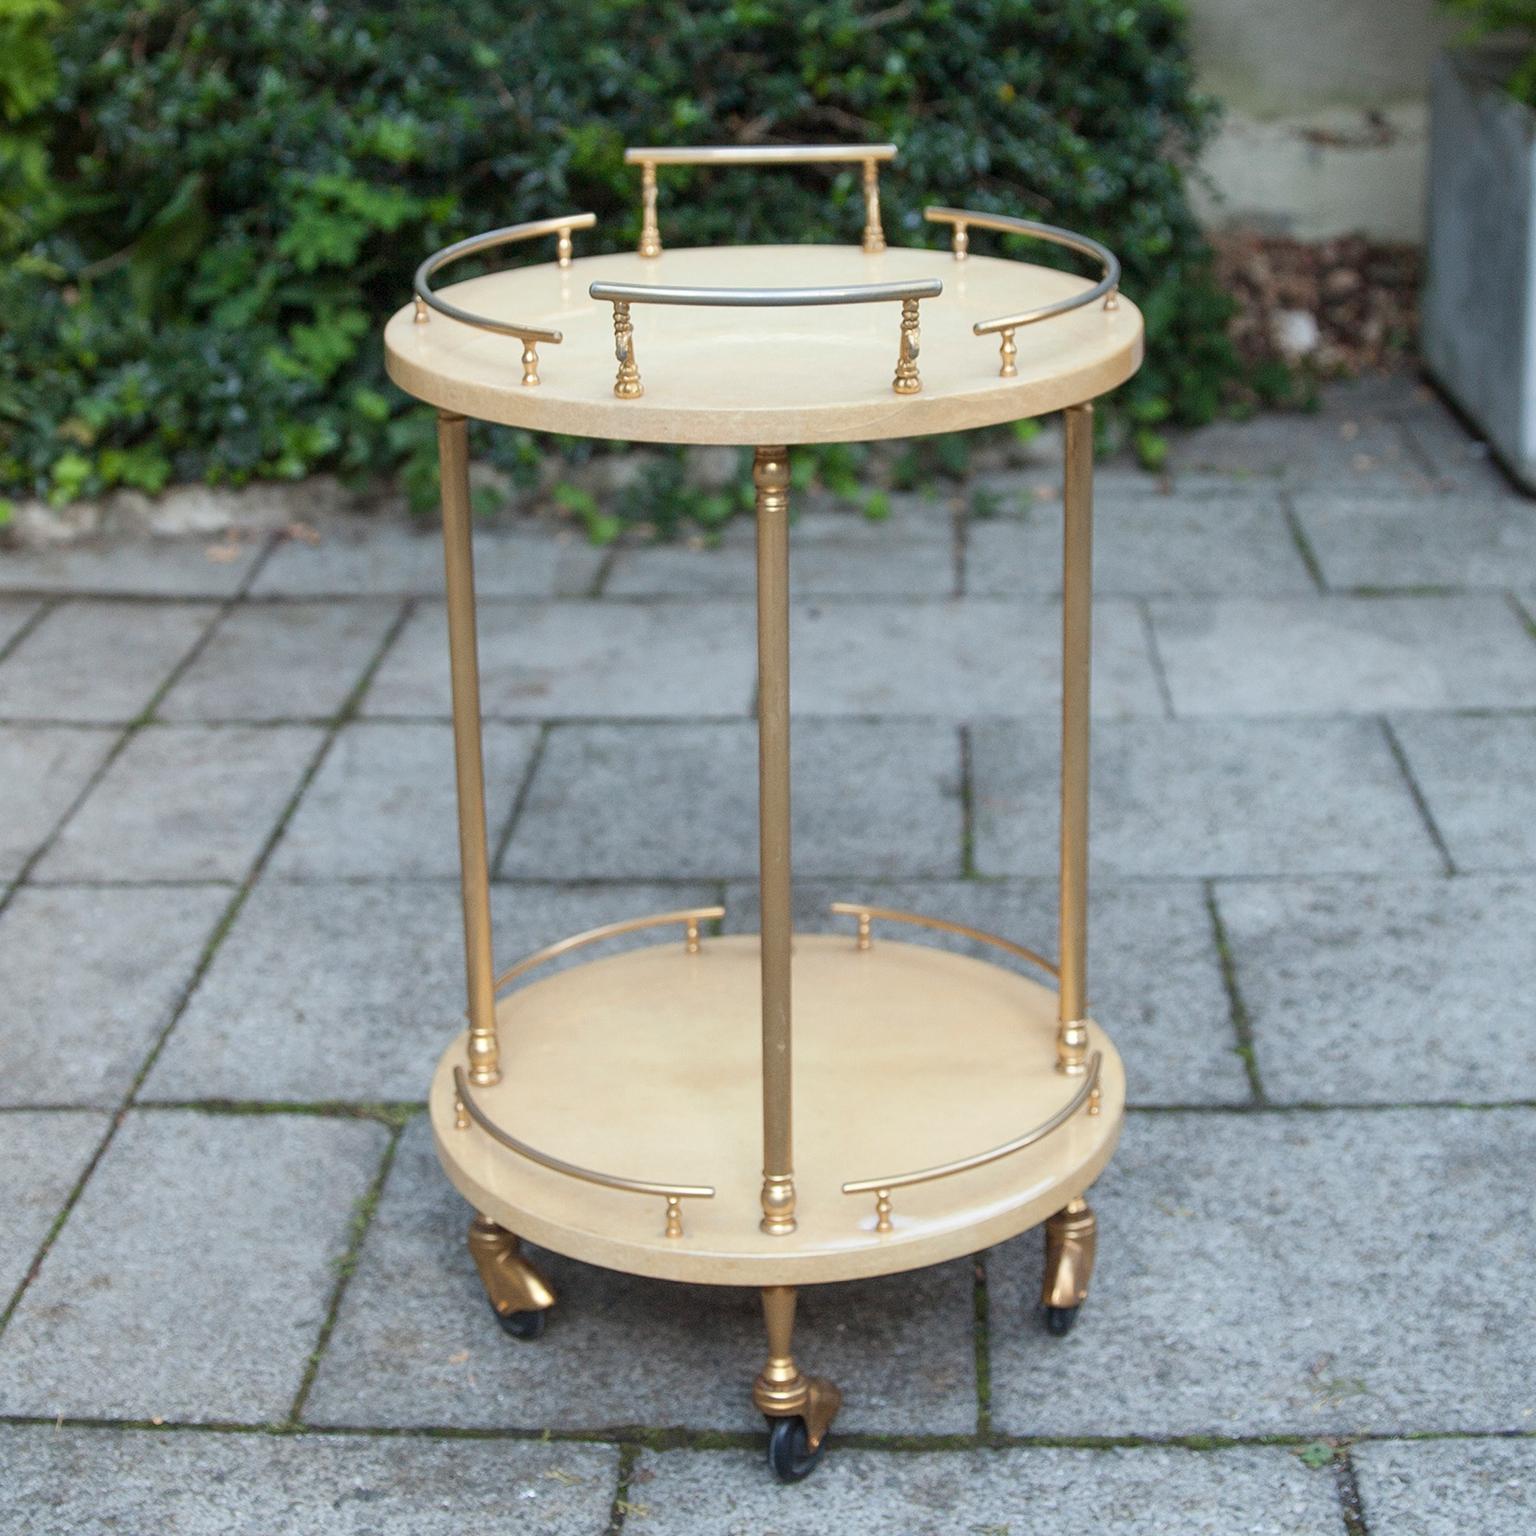 Round serving cart with brass applications made by Aldo Tura , Italy 1960s. The wooden frame is covered with cream colored goatskin, varnished in clear acrylic lacquer and the polished surface is in excellent condition. This particular bar cart was